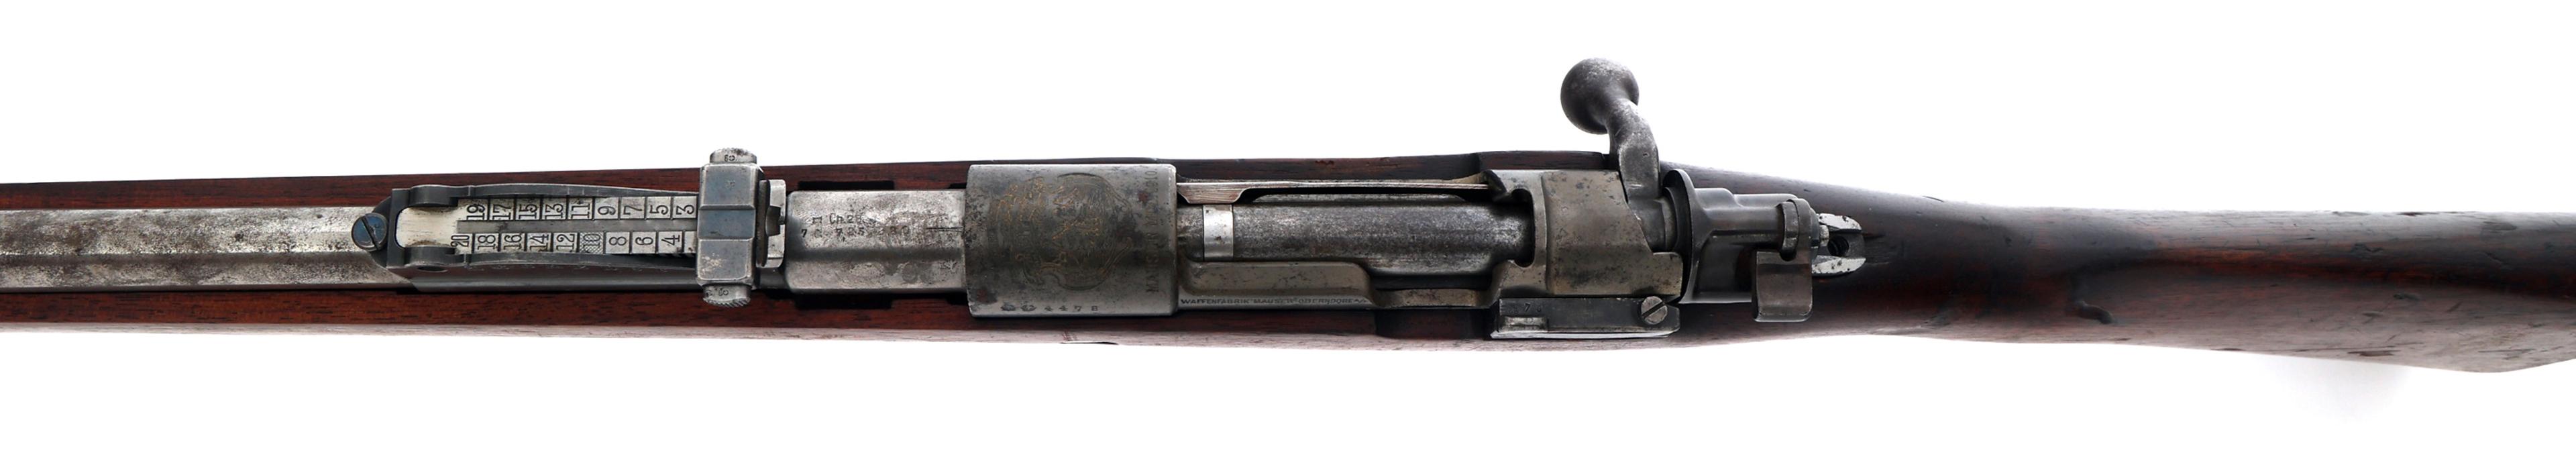 COSTA RICAN MAUSER MODEL 1910 RIFLE FOR PARTS